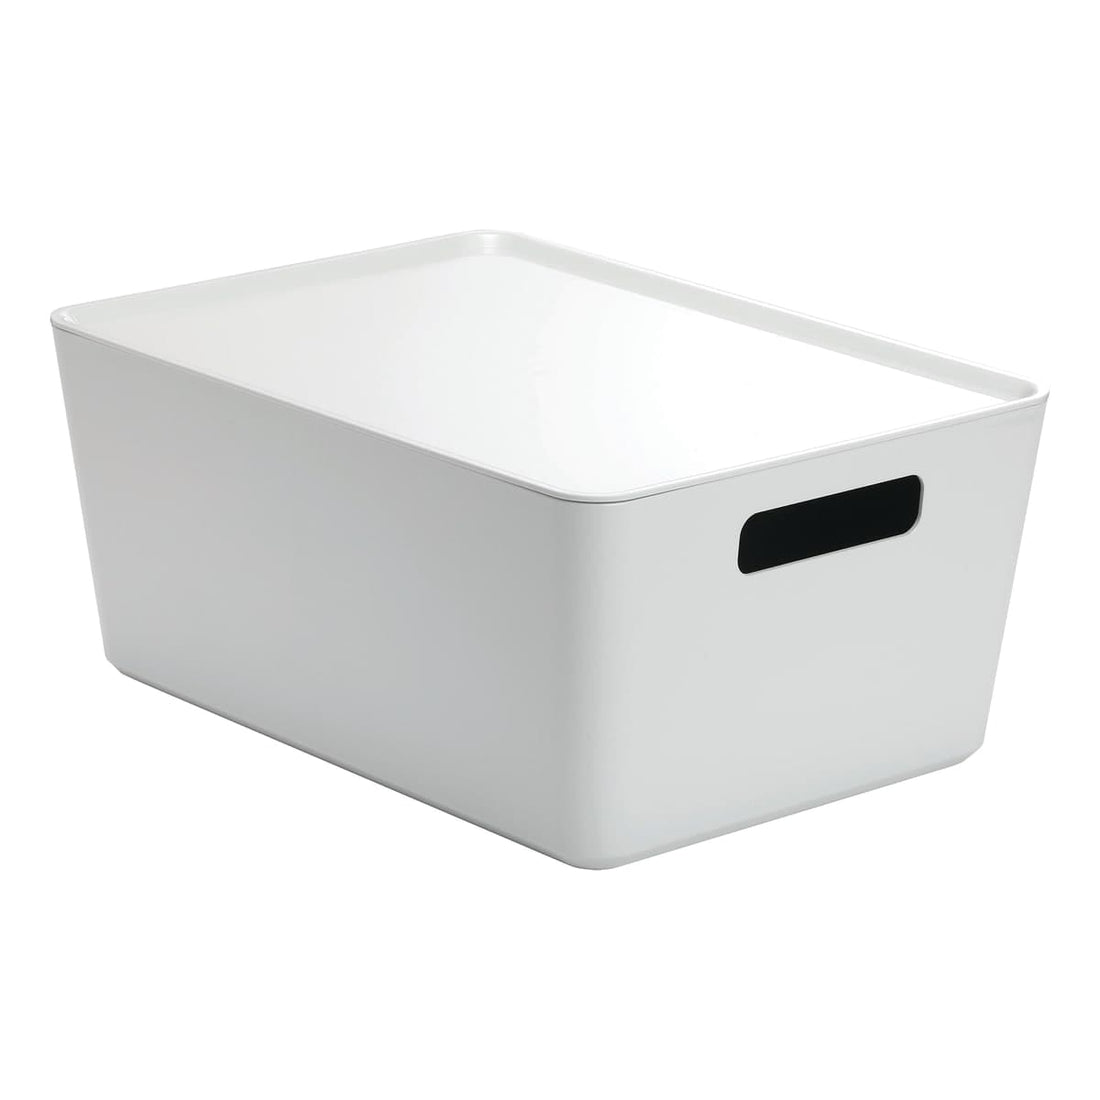 CONTAINER WITH LID R-BOX1 LARGE WHITE 33X24X14 CM